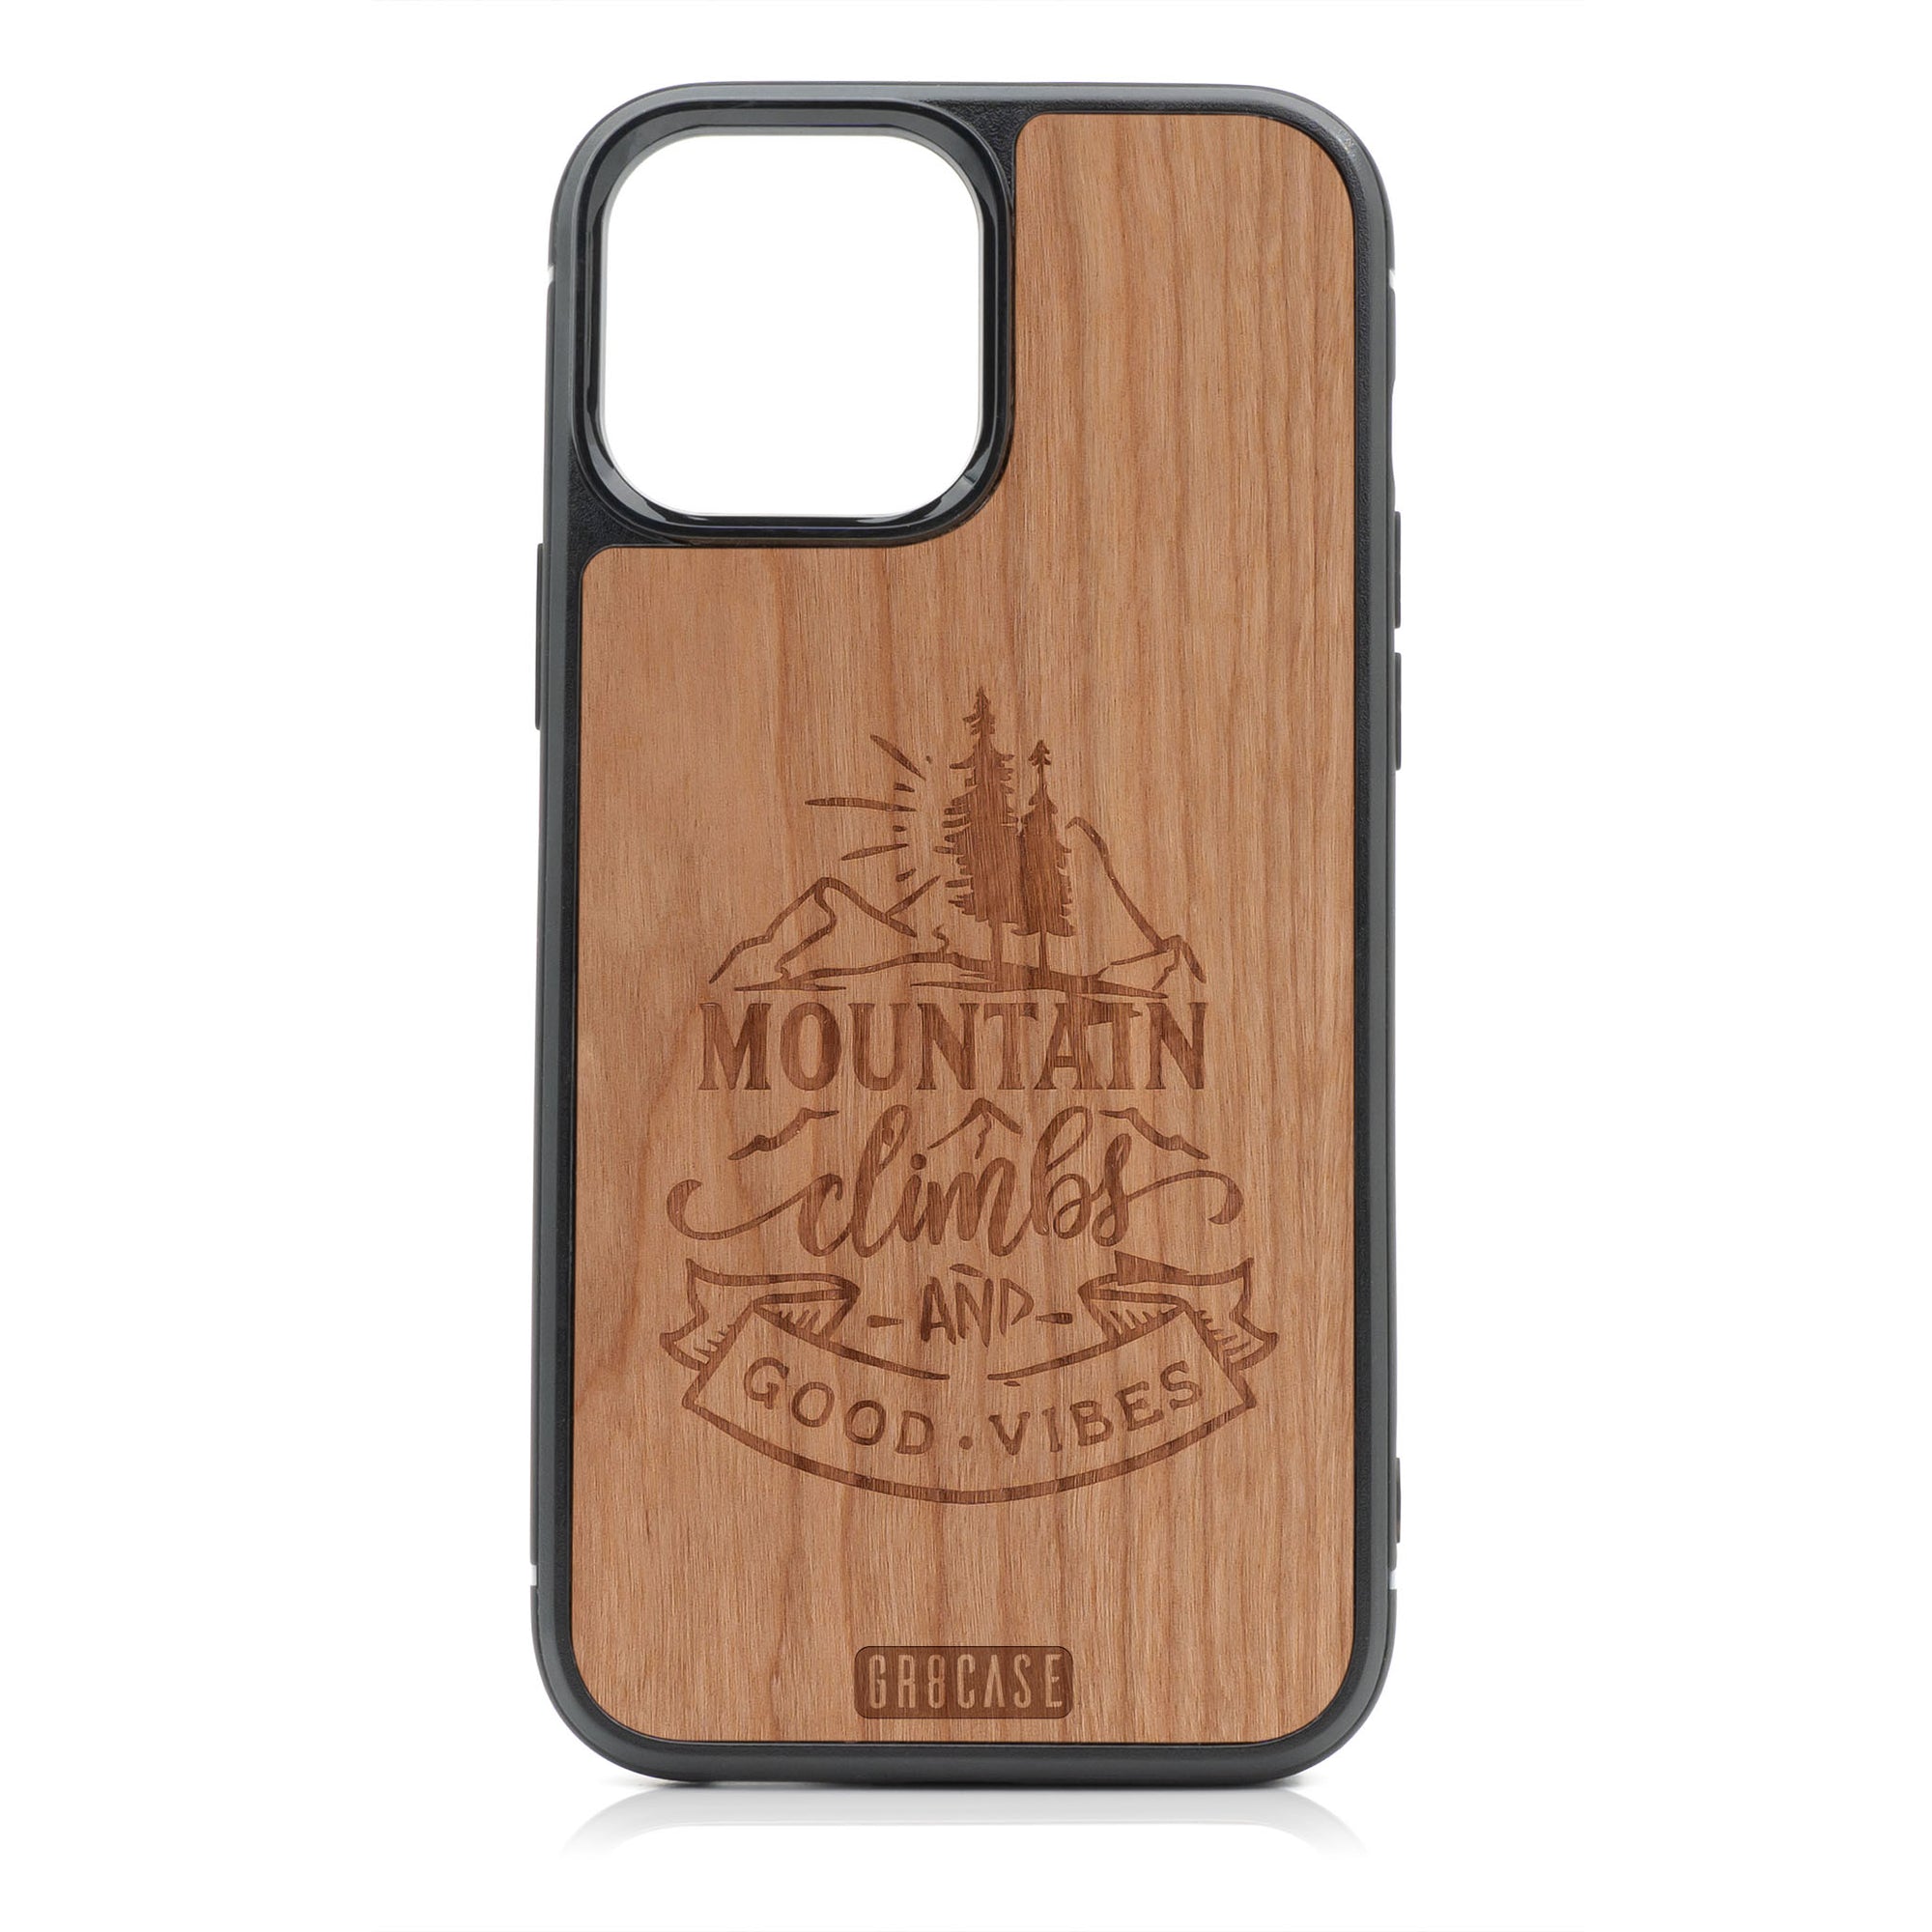 Mountain Climb Good Vibes Design Wood Case For iPhone 13 Pro Max